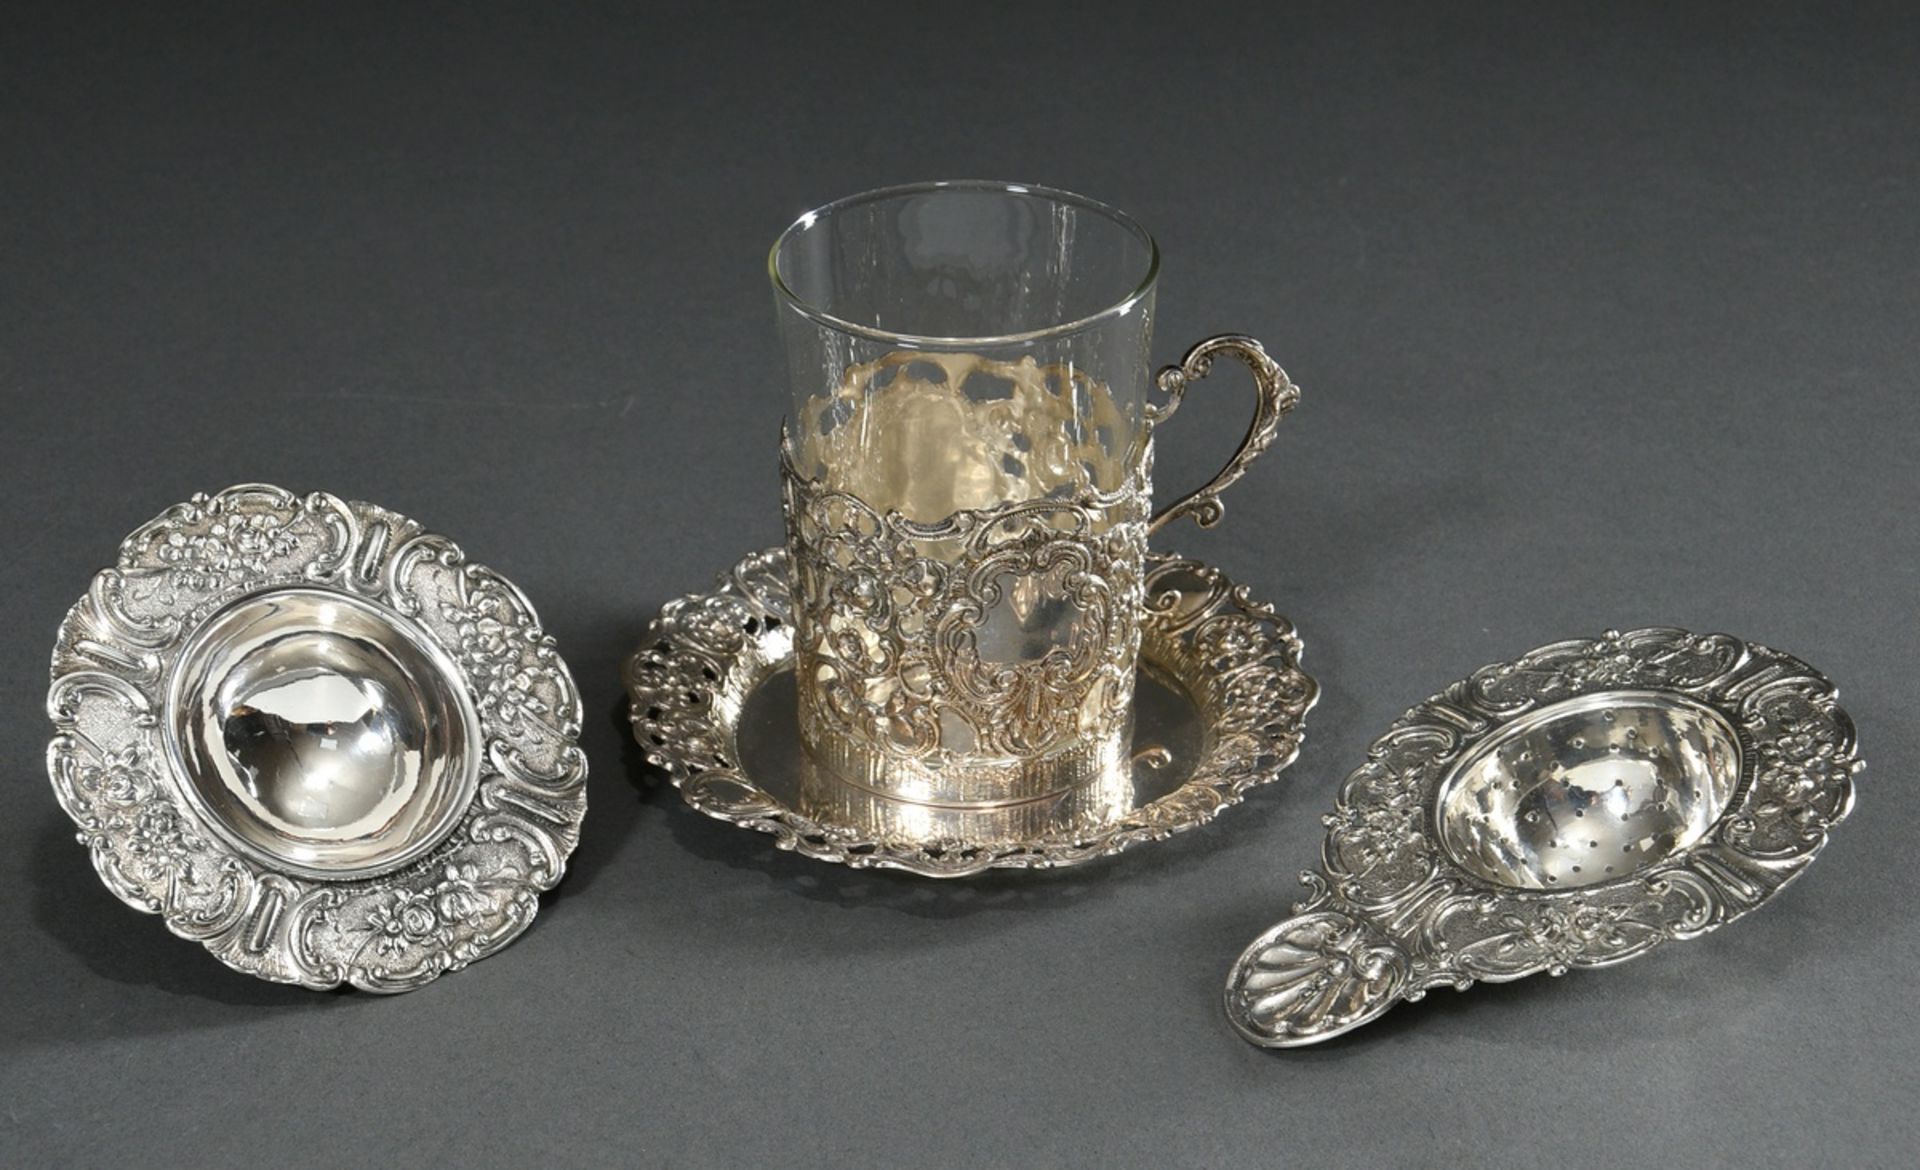 2 pieces richly reliefed tea glass on saucer and tea strainer on saucer "Roses and Rocailles", Germ - Image 2 of 7